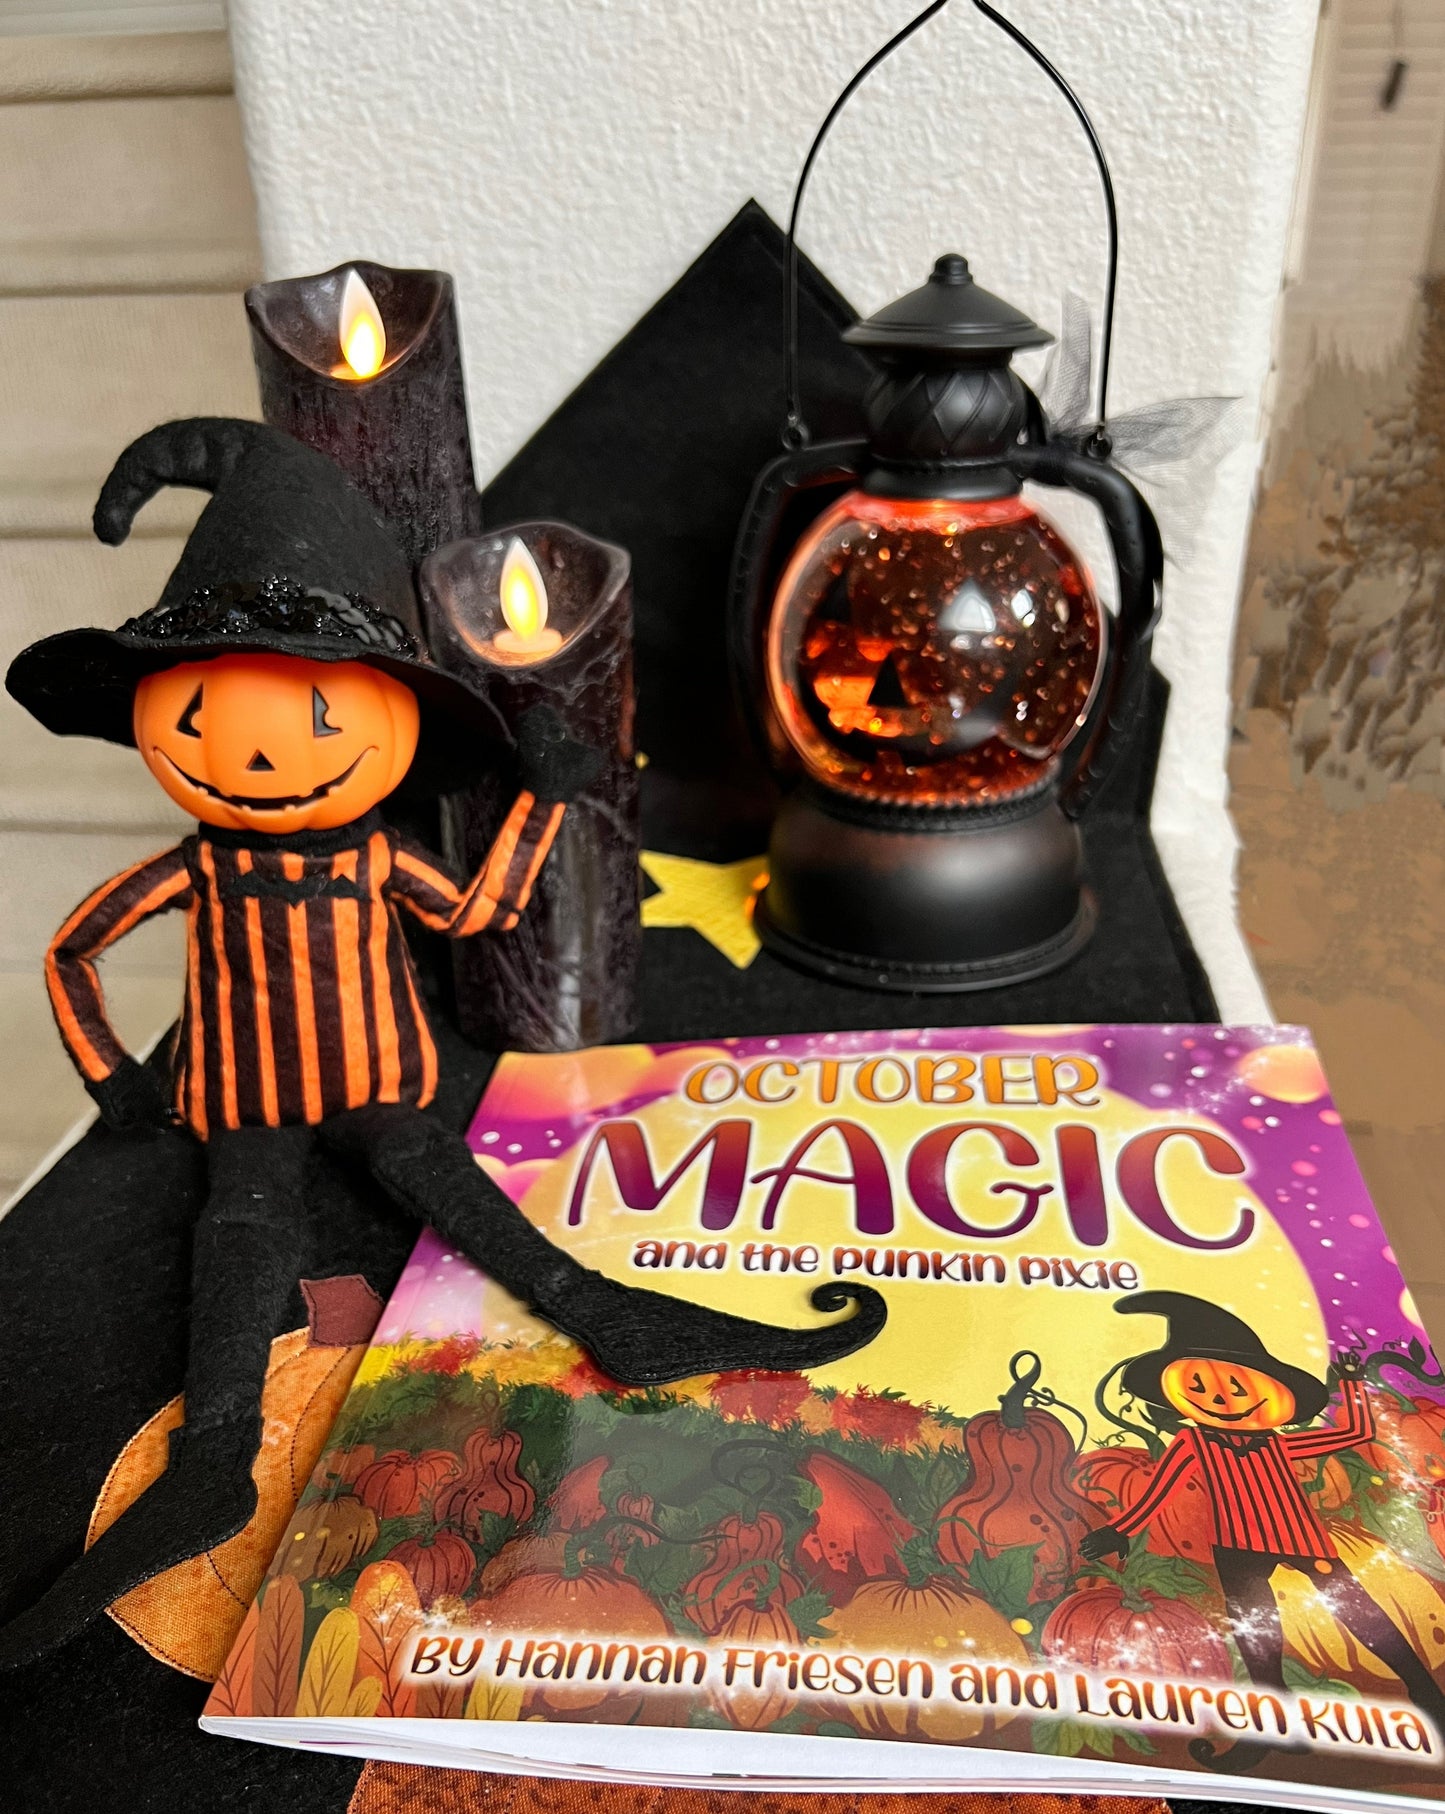 Punkin Pixie and 'October Magic and the Punkin Pixie' book - Combination